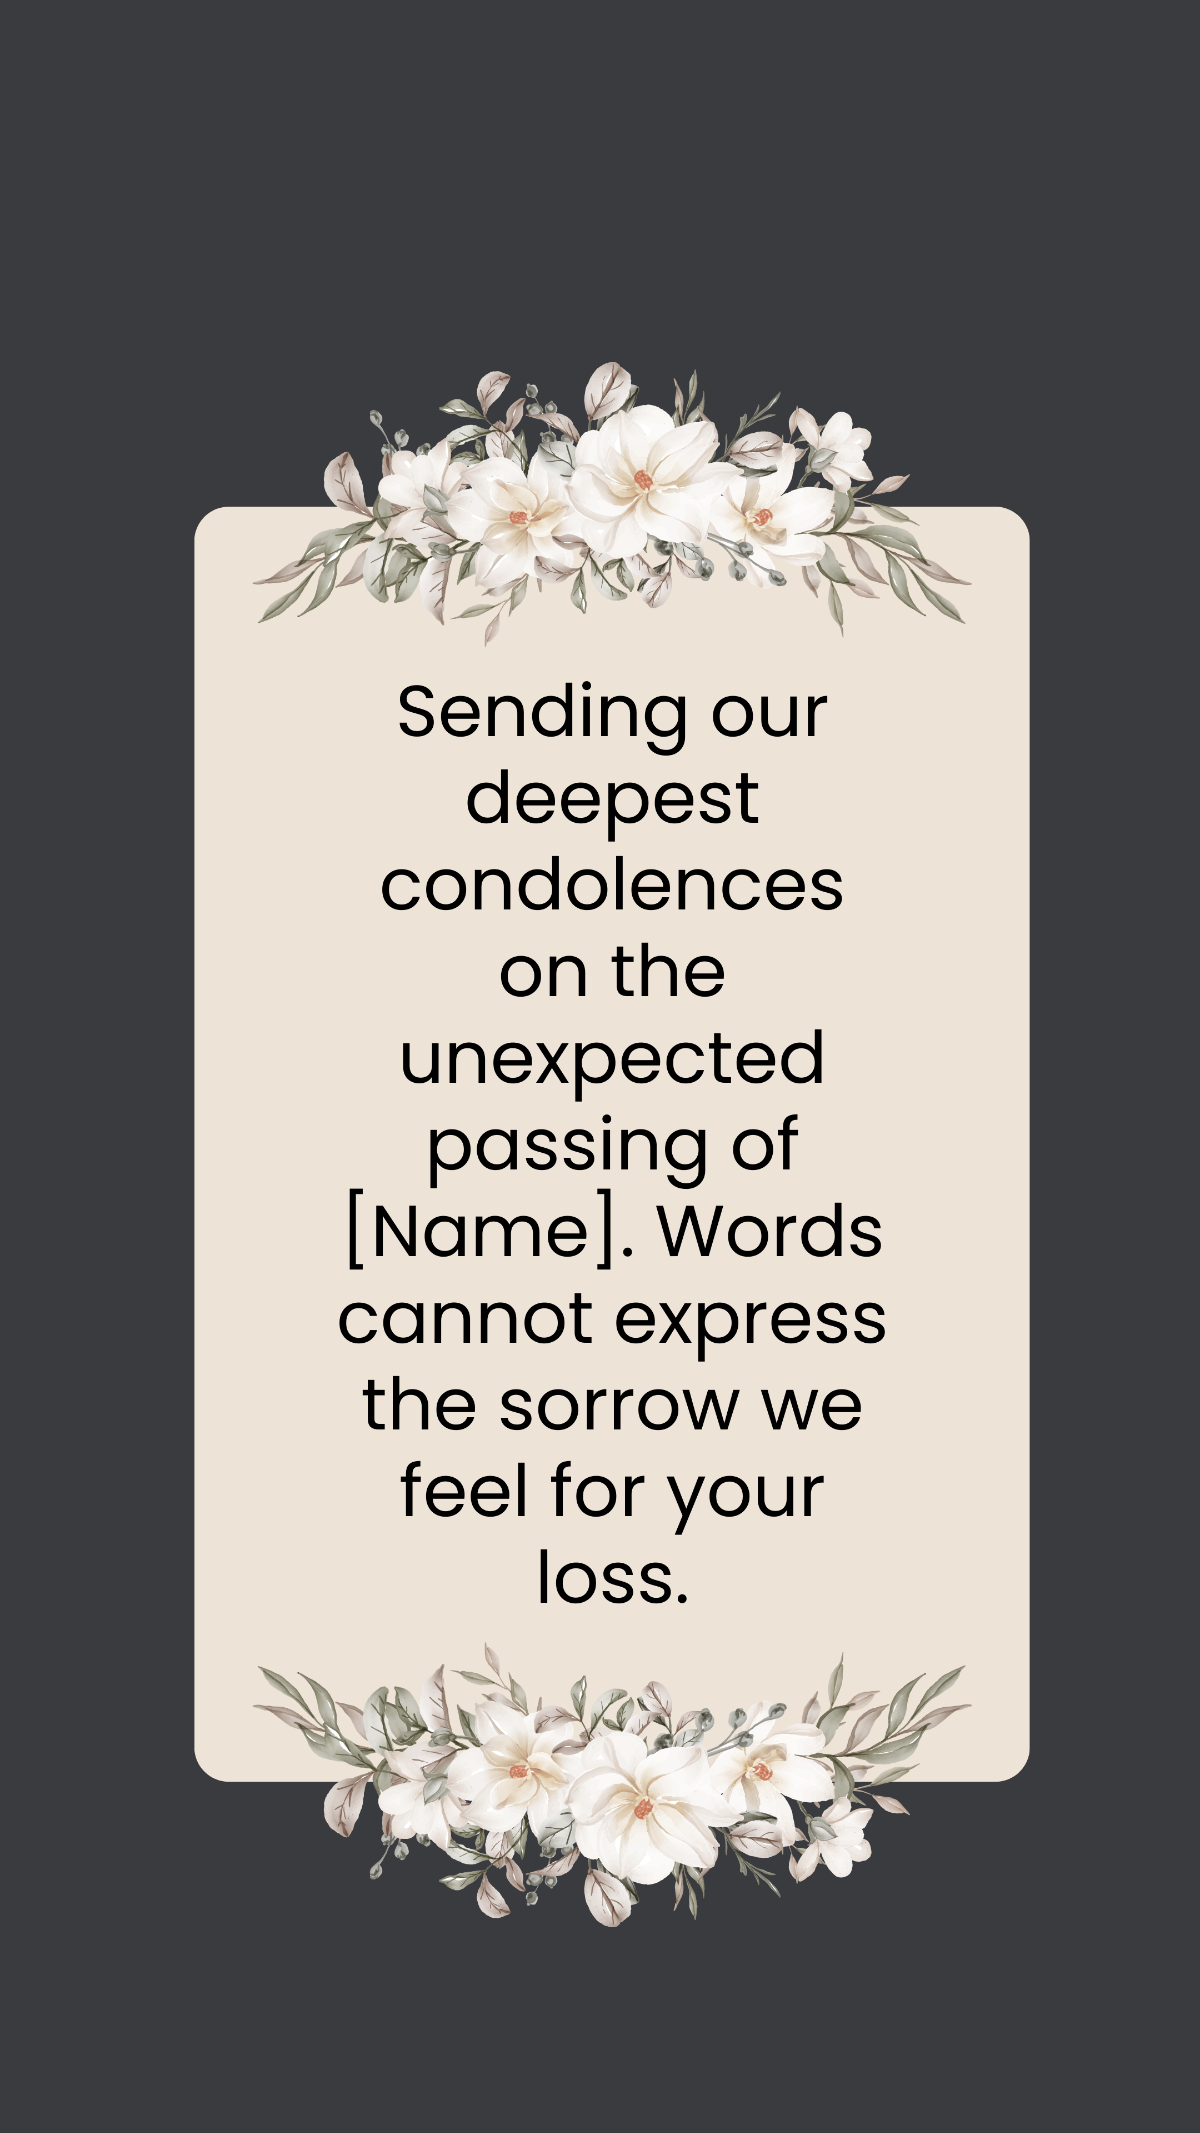 Free Condolence Message For Unexpected Death Template